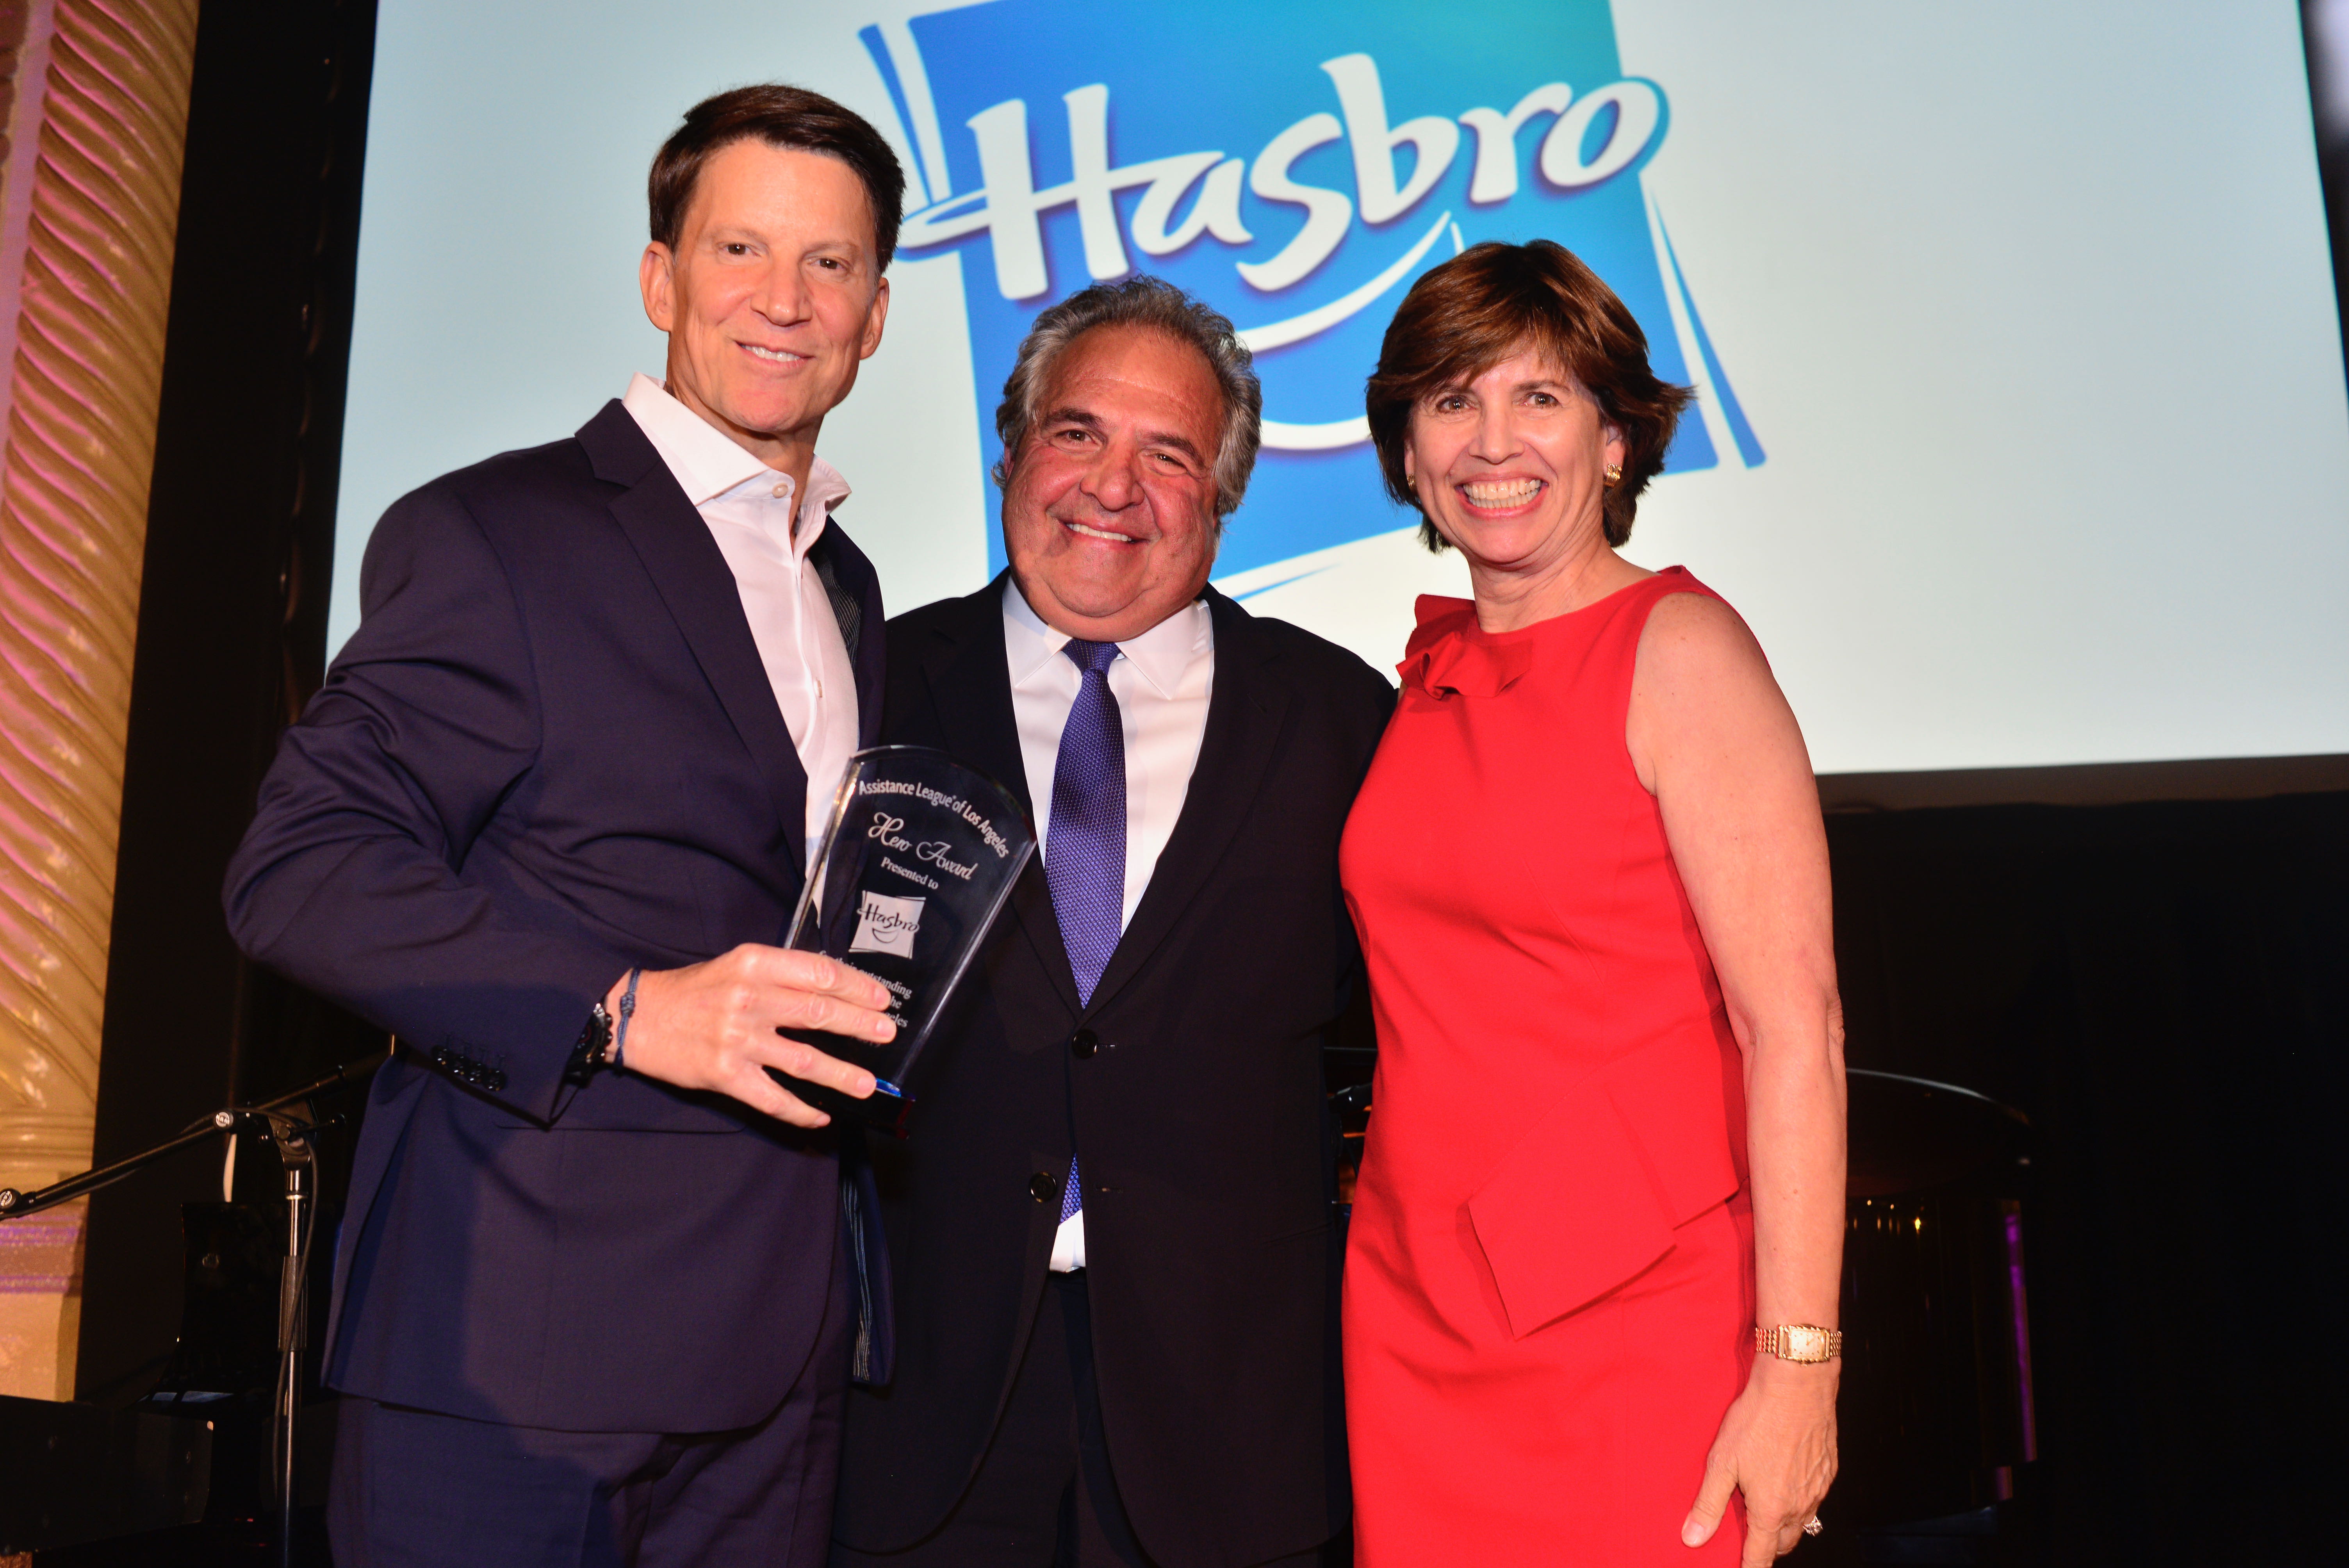 Hasbro CEO Brian Goldner received the Assistance League of Los Angeles Hero Award from Paramount Pictures CEO Jim Gianopulos and Assistance League Board President Kathy Balzer - Photo: Martin Cohen